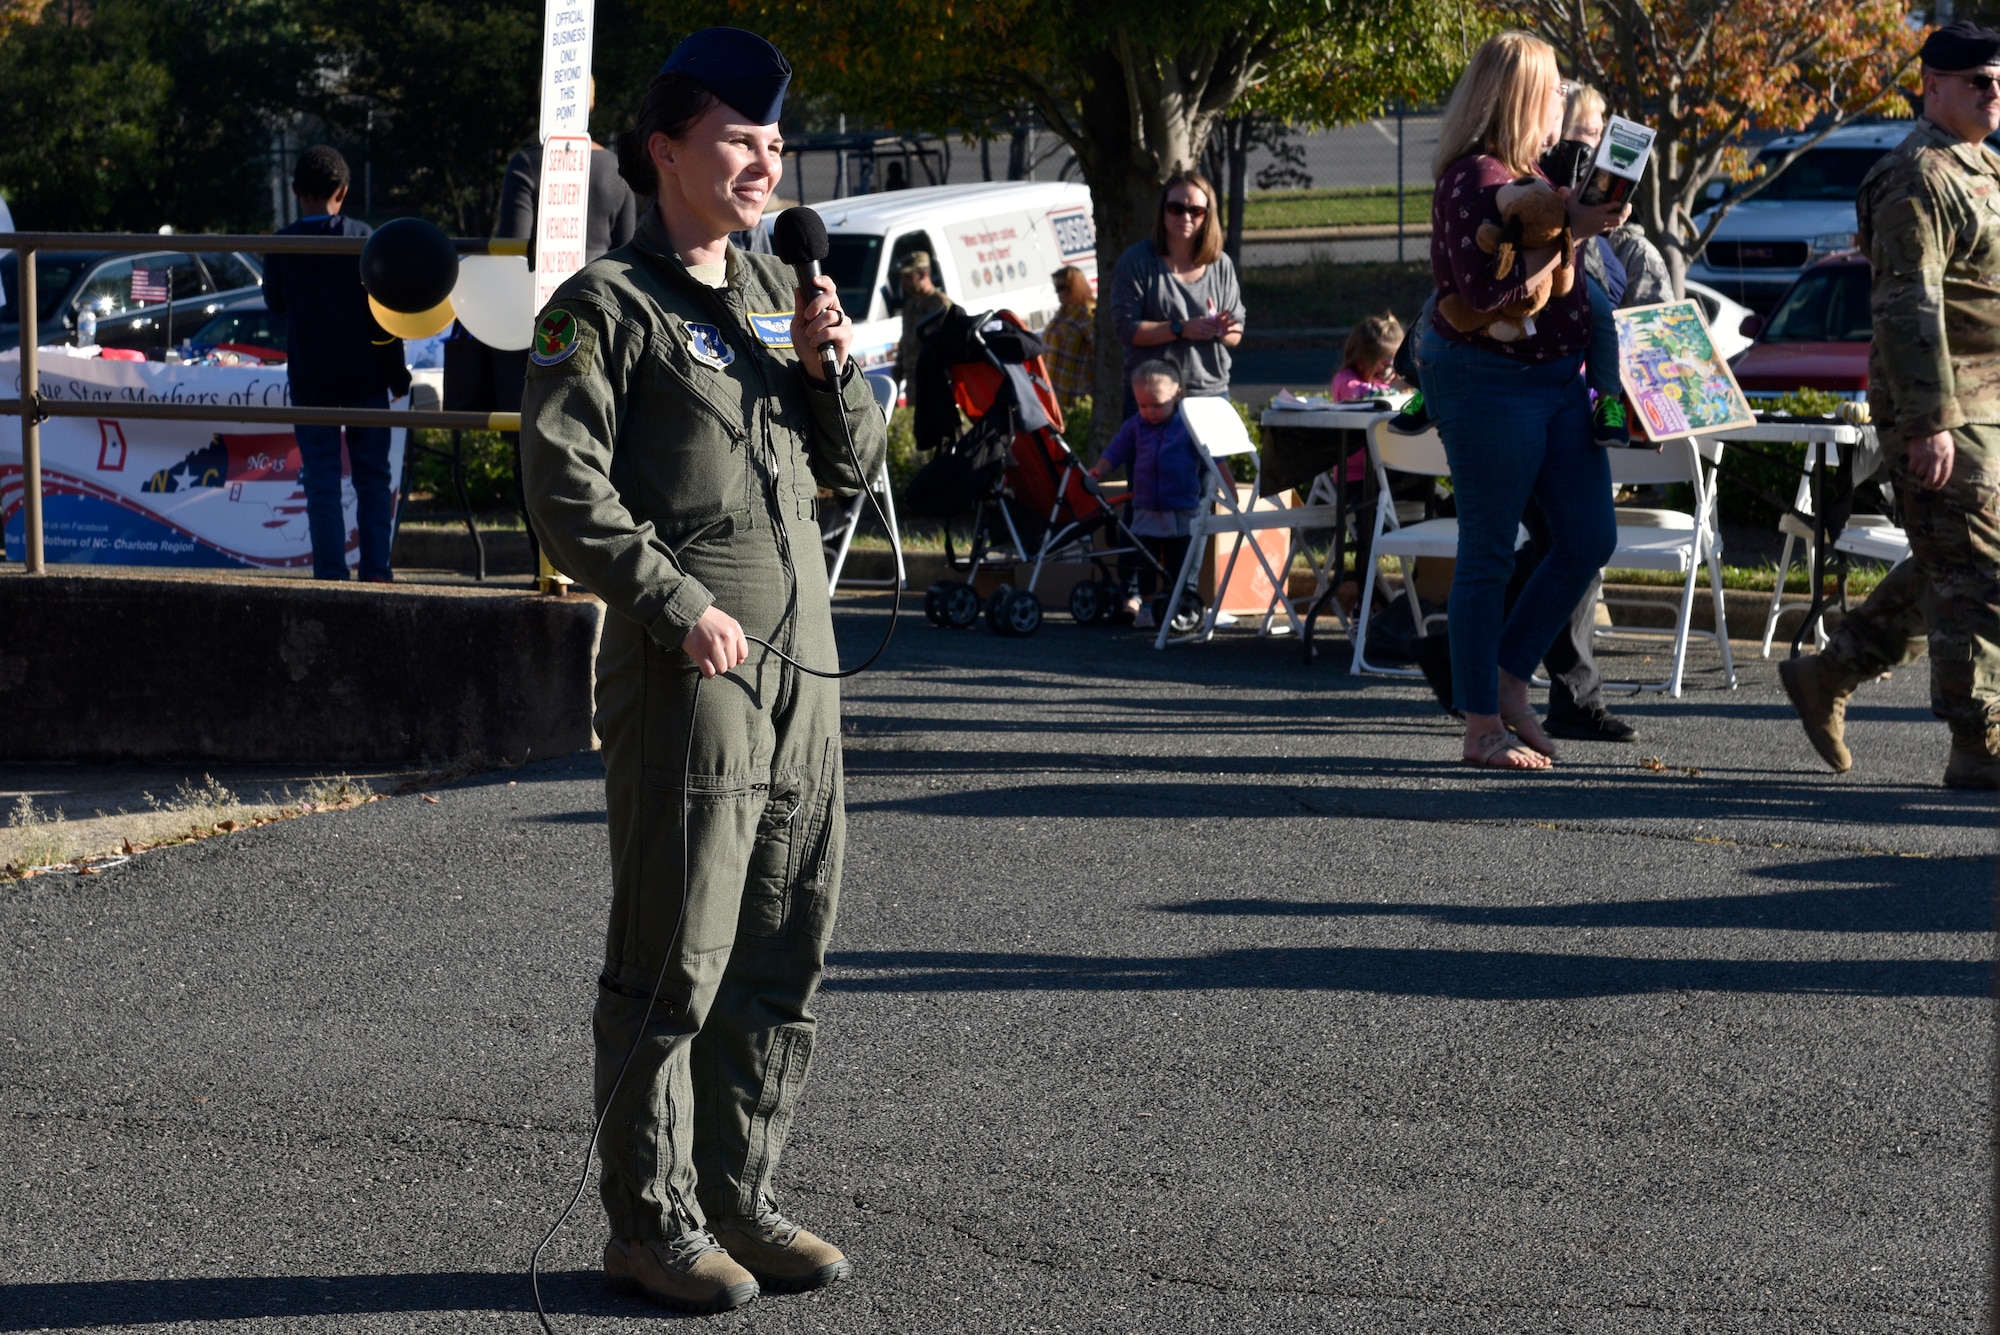 U.S. Air Force 145th Airlift Wing Junior Enlisted Council President, Staff Sgt. Alicia Correa, announces events during a Fall Festival put together by the Junior Enlisted Council (JEC) at the North Carolina Air National Guard (NCANG) Base, Charlotte Douglas International Airport, Nov. 2, 2019. The Fall Festival is a first-time event for the JEC and NCANG that is hoped to be held for years to come.